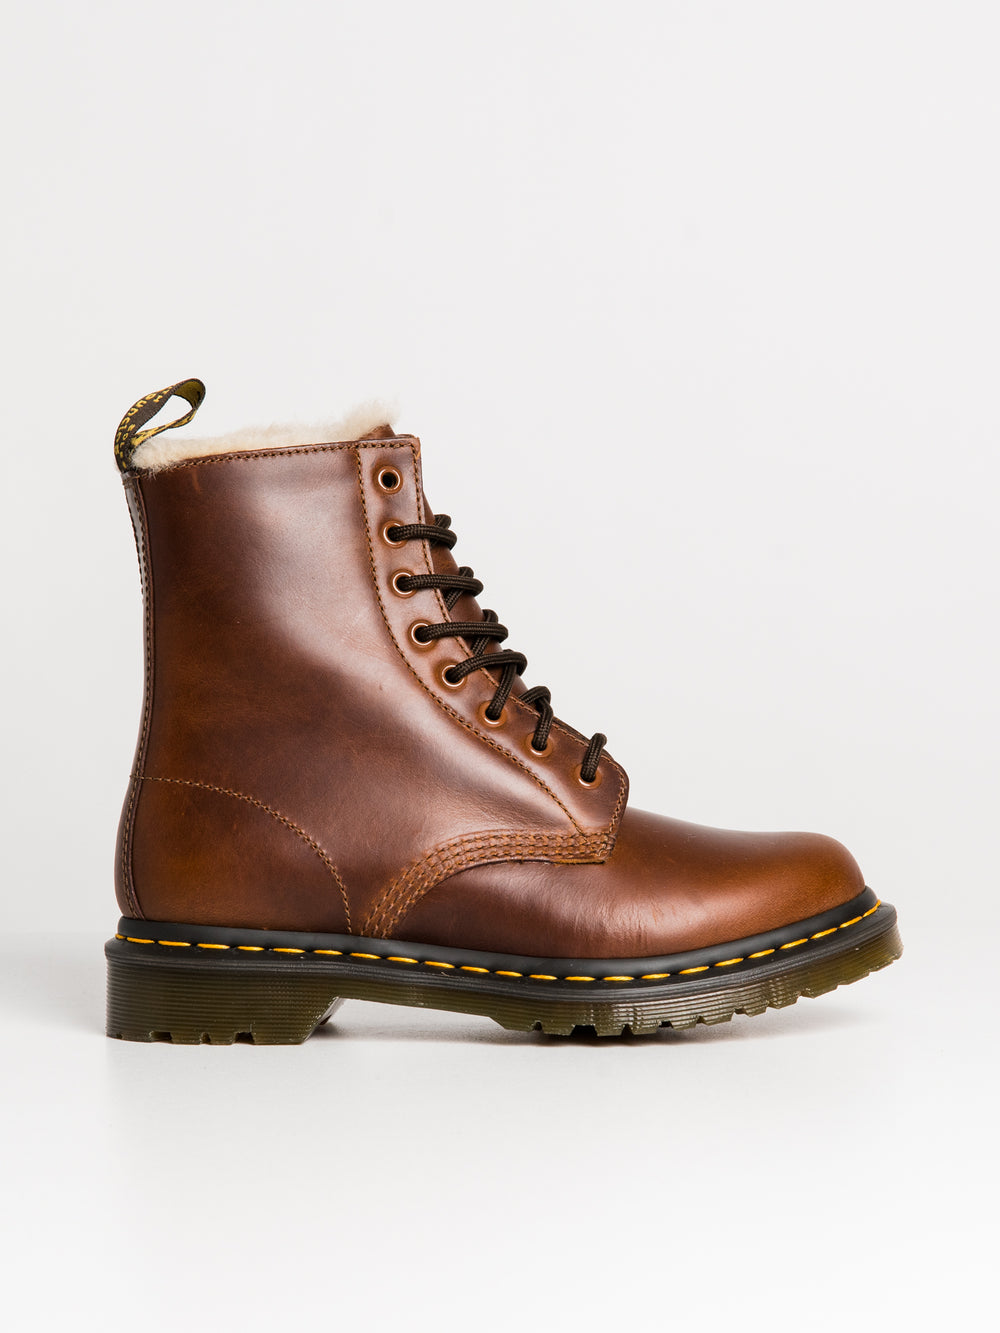 WOMENS DR MARTENS 1460 SERENA BOOT - CLEARANCE